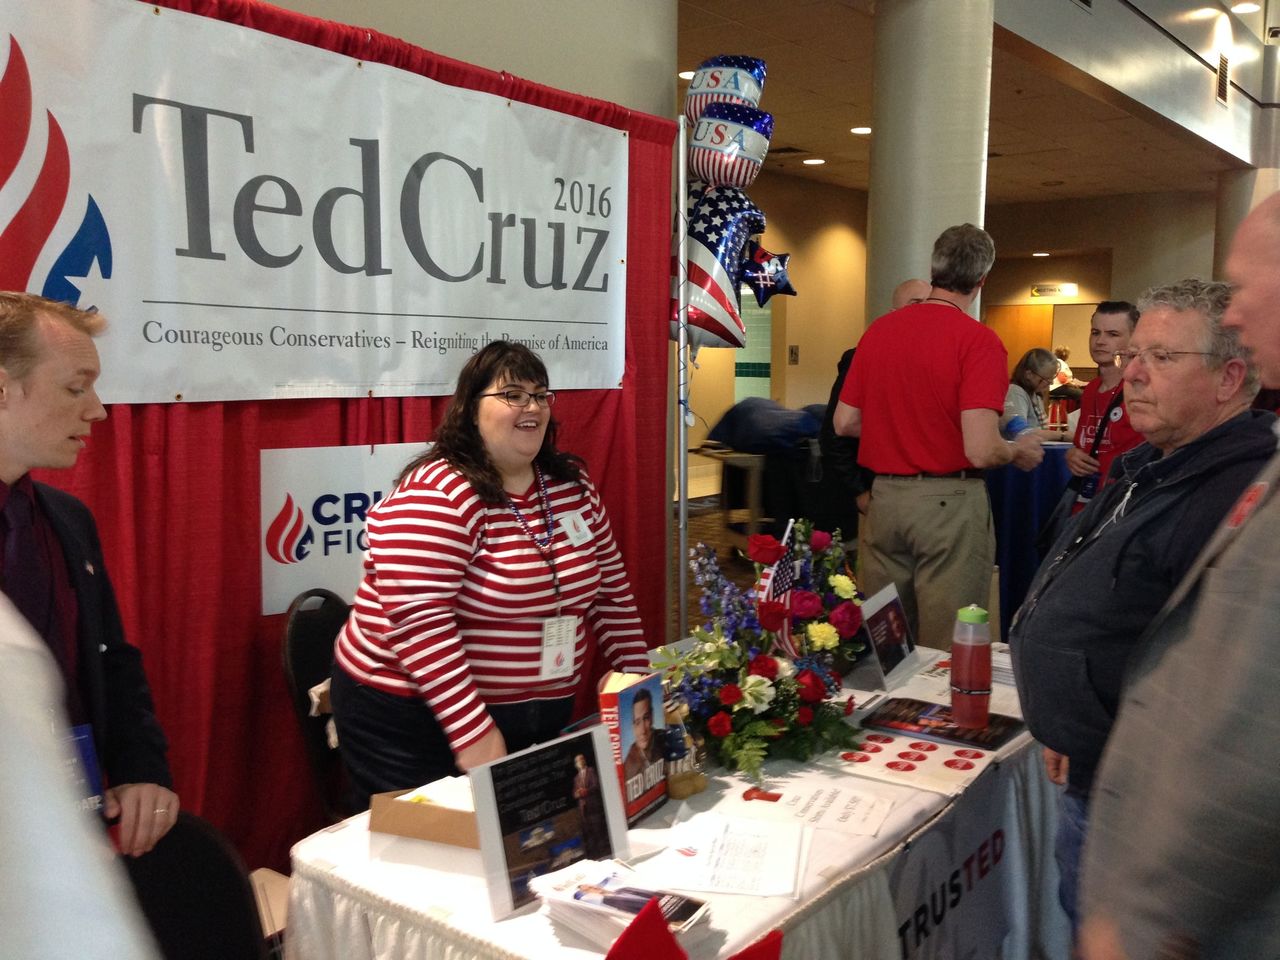 Jennifer Fetters, of Bellevue, works the Ted Cruz booth at the Washington state GOP convention in Pasco on Thursday. More than 2,000 Republicans from across Washington are expected to attend the convention, which runs through Saturday.